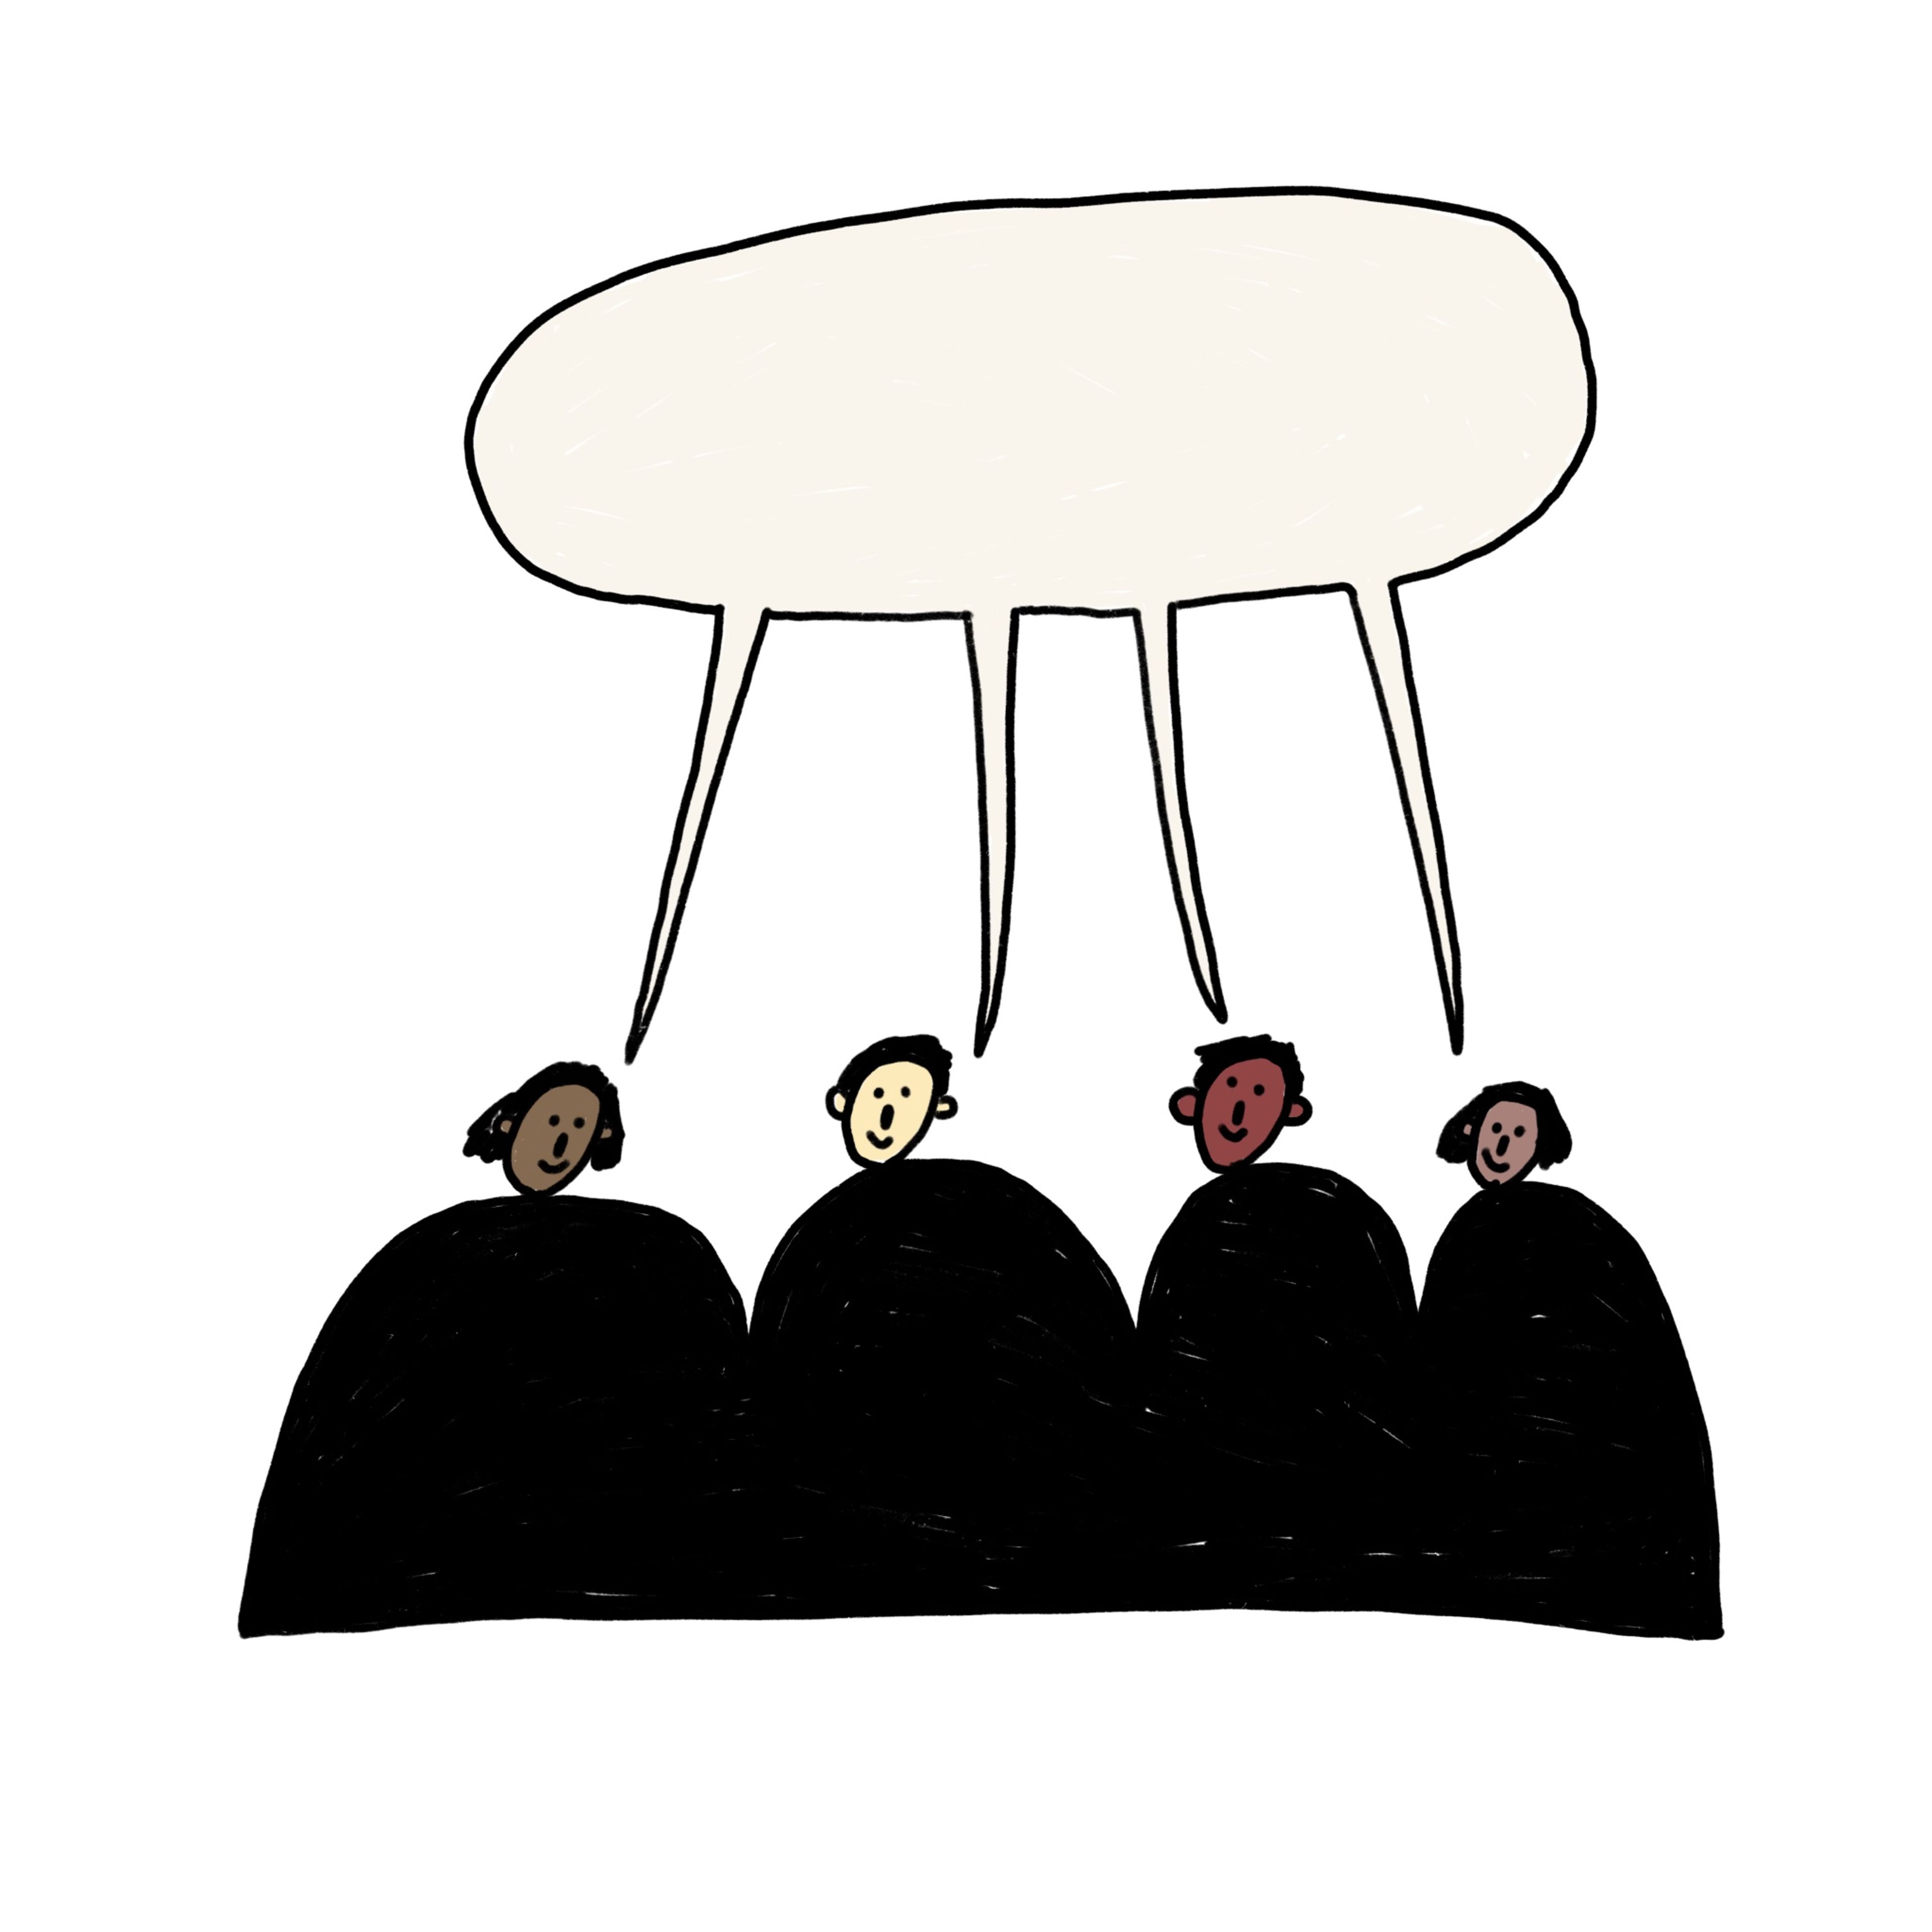 Illustration of peope having a discussion